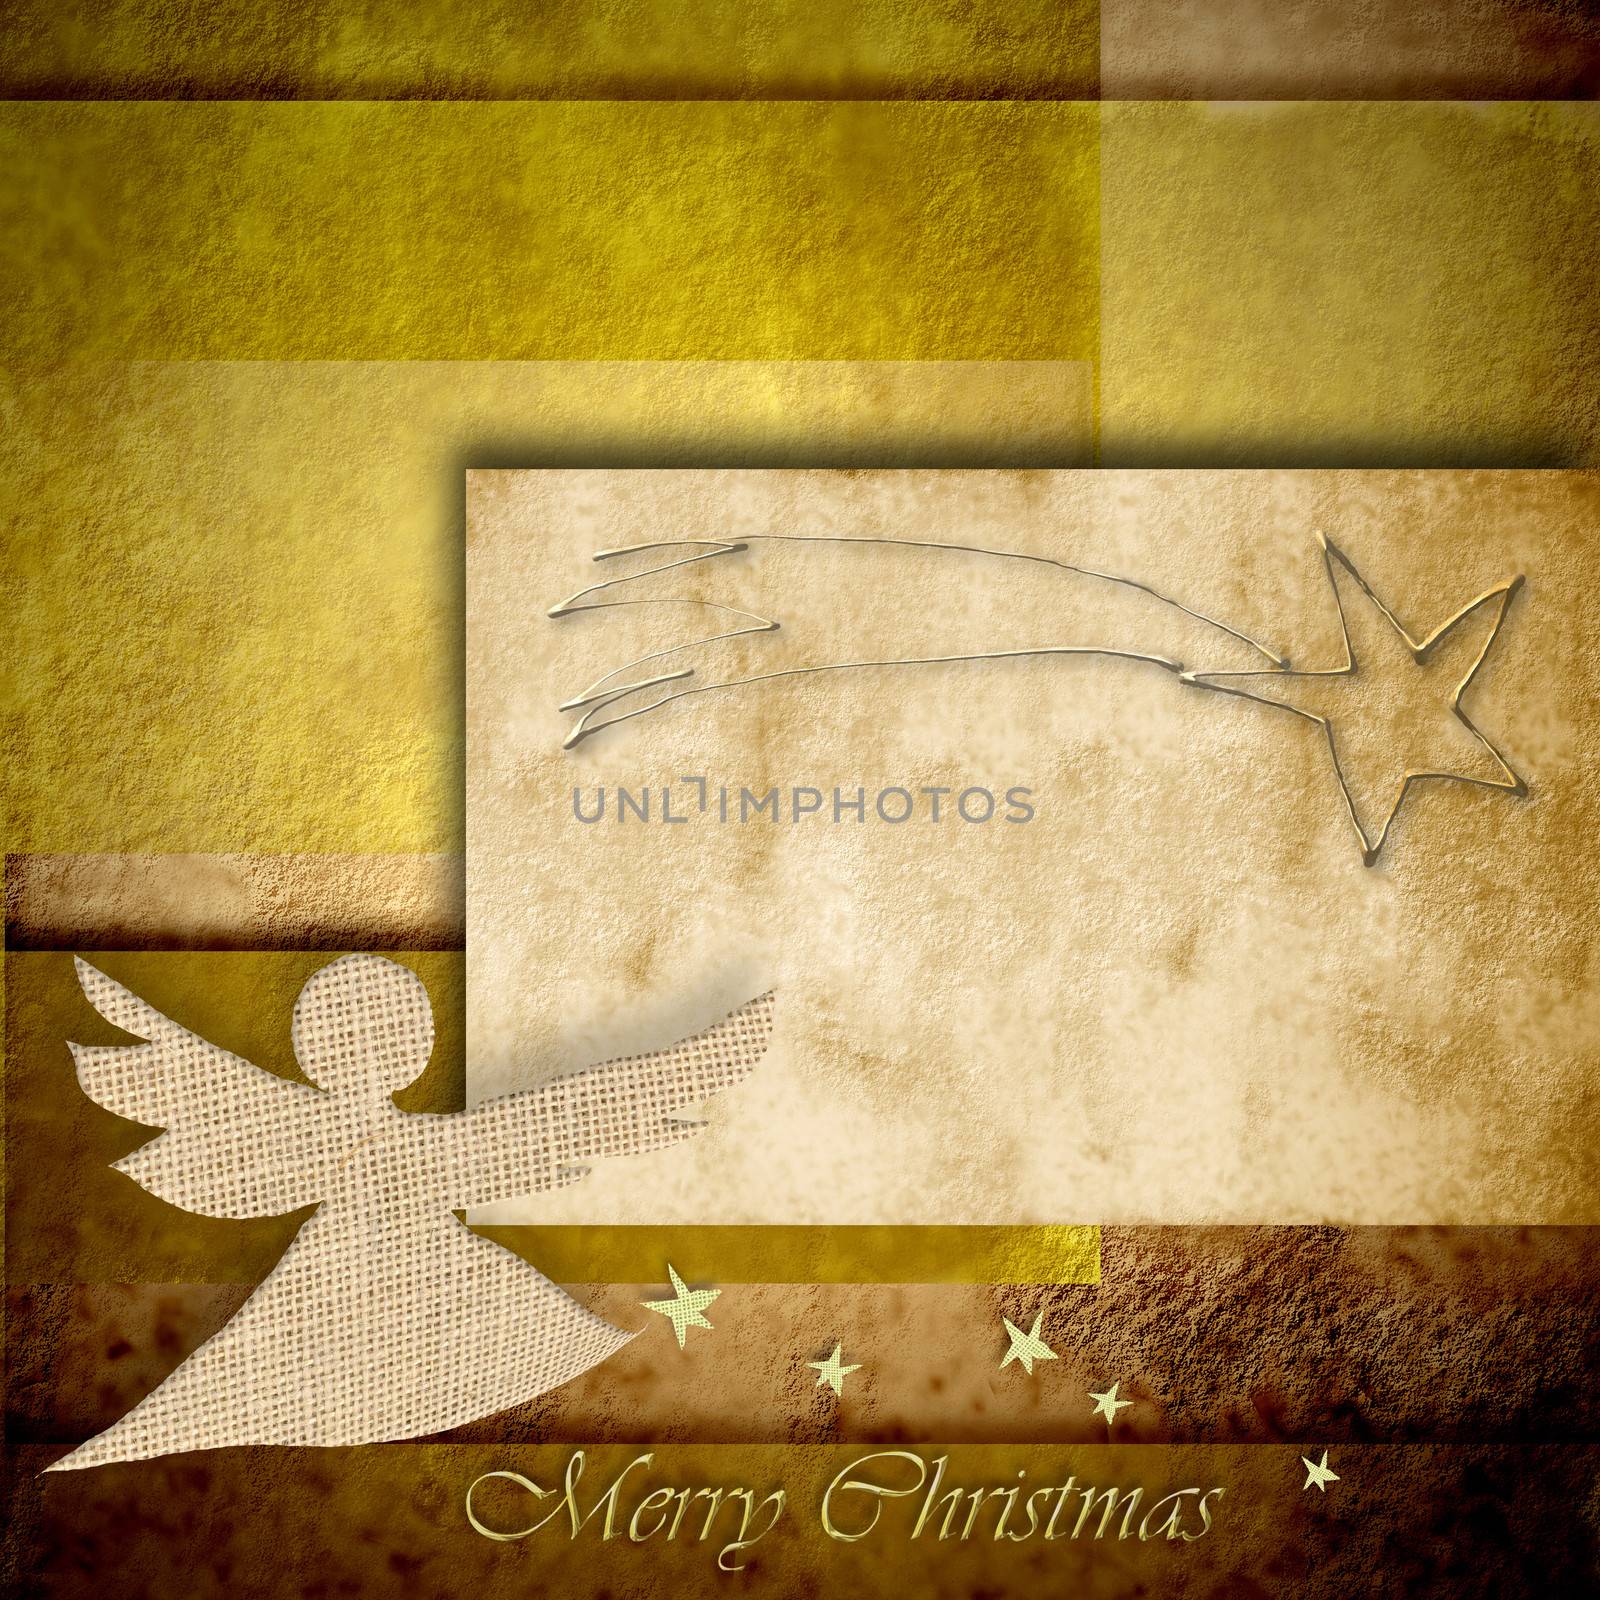 Angel Christmas background with space for writing by Carche